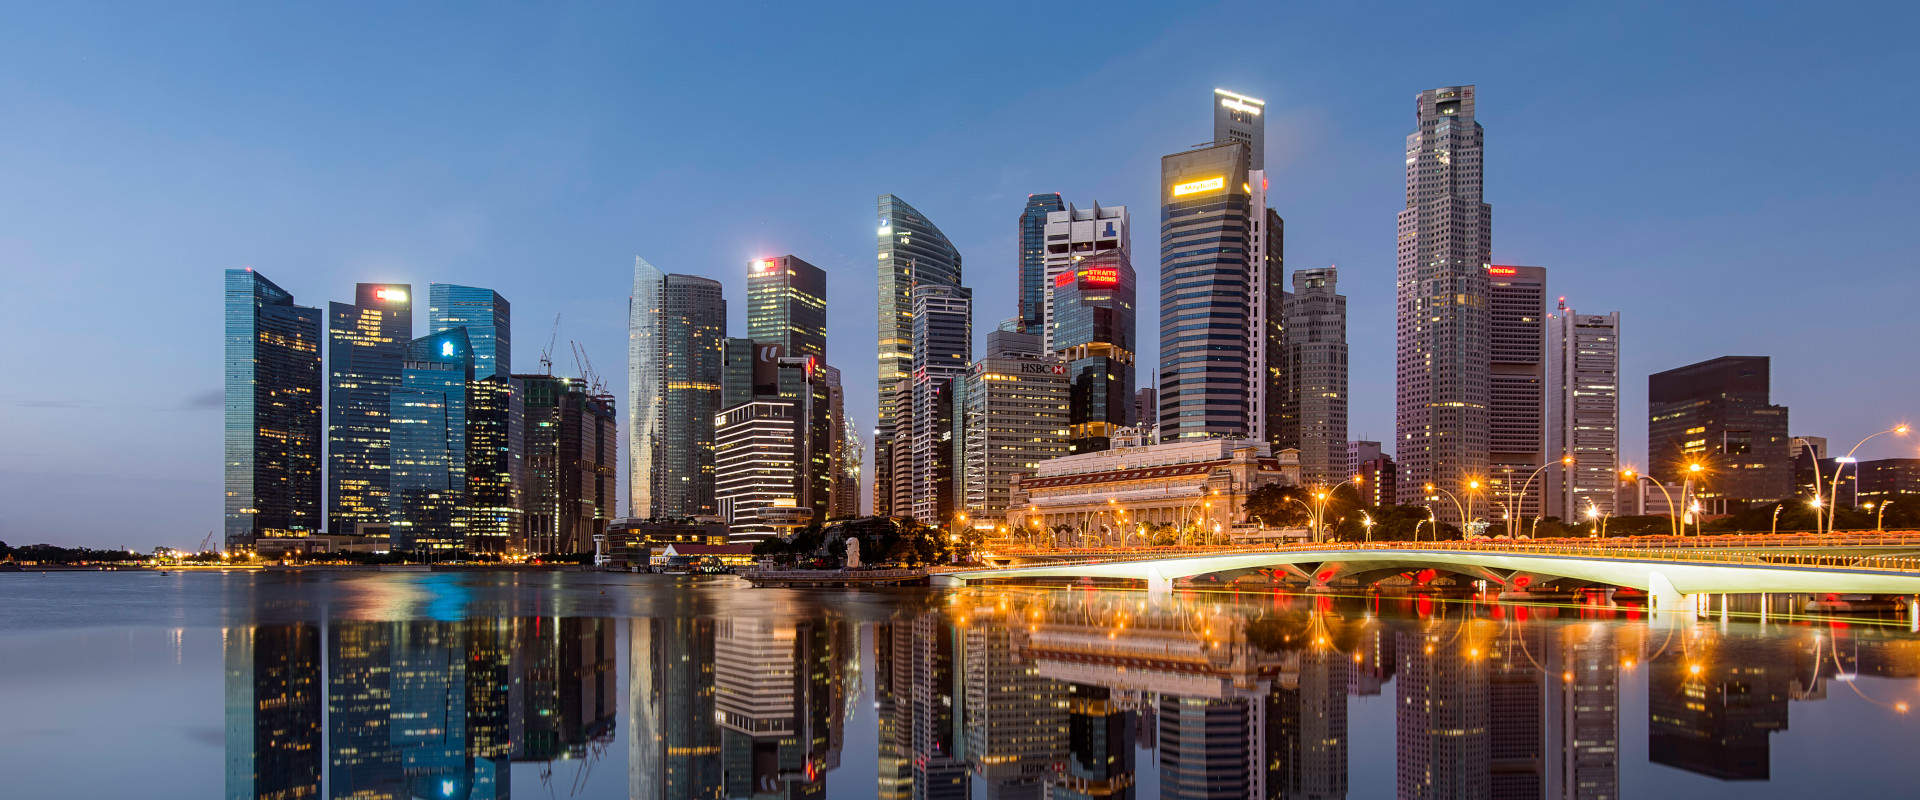 The Singapore city skyline at dusk, reflected in the still water in front